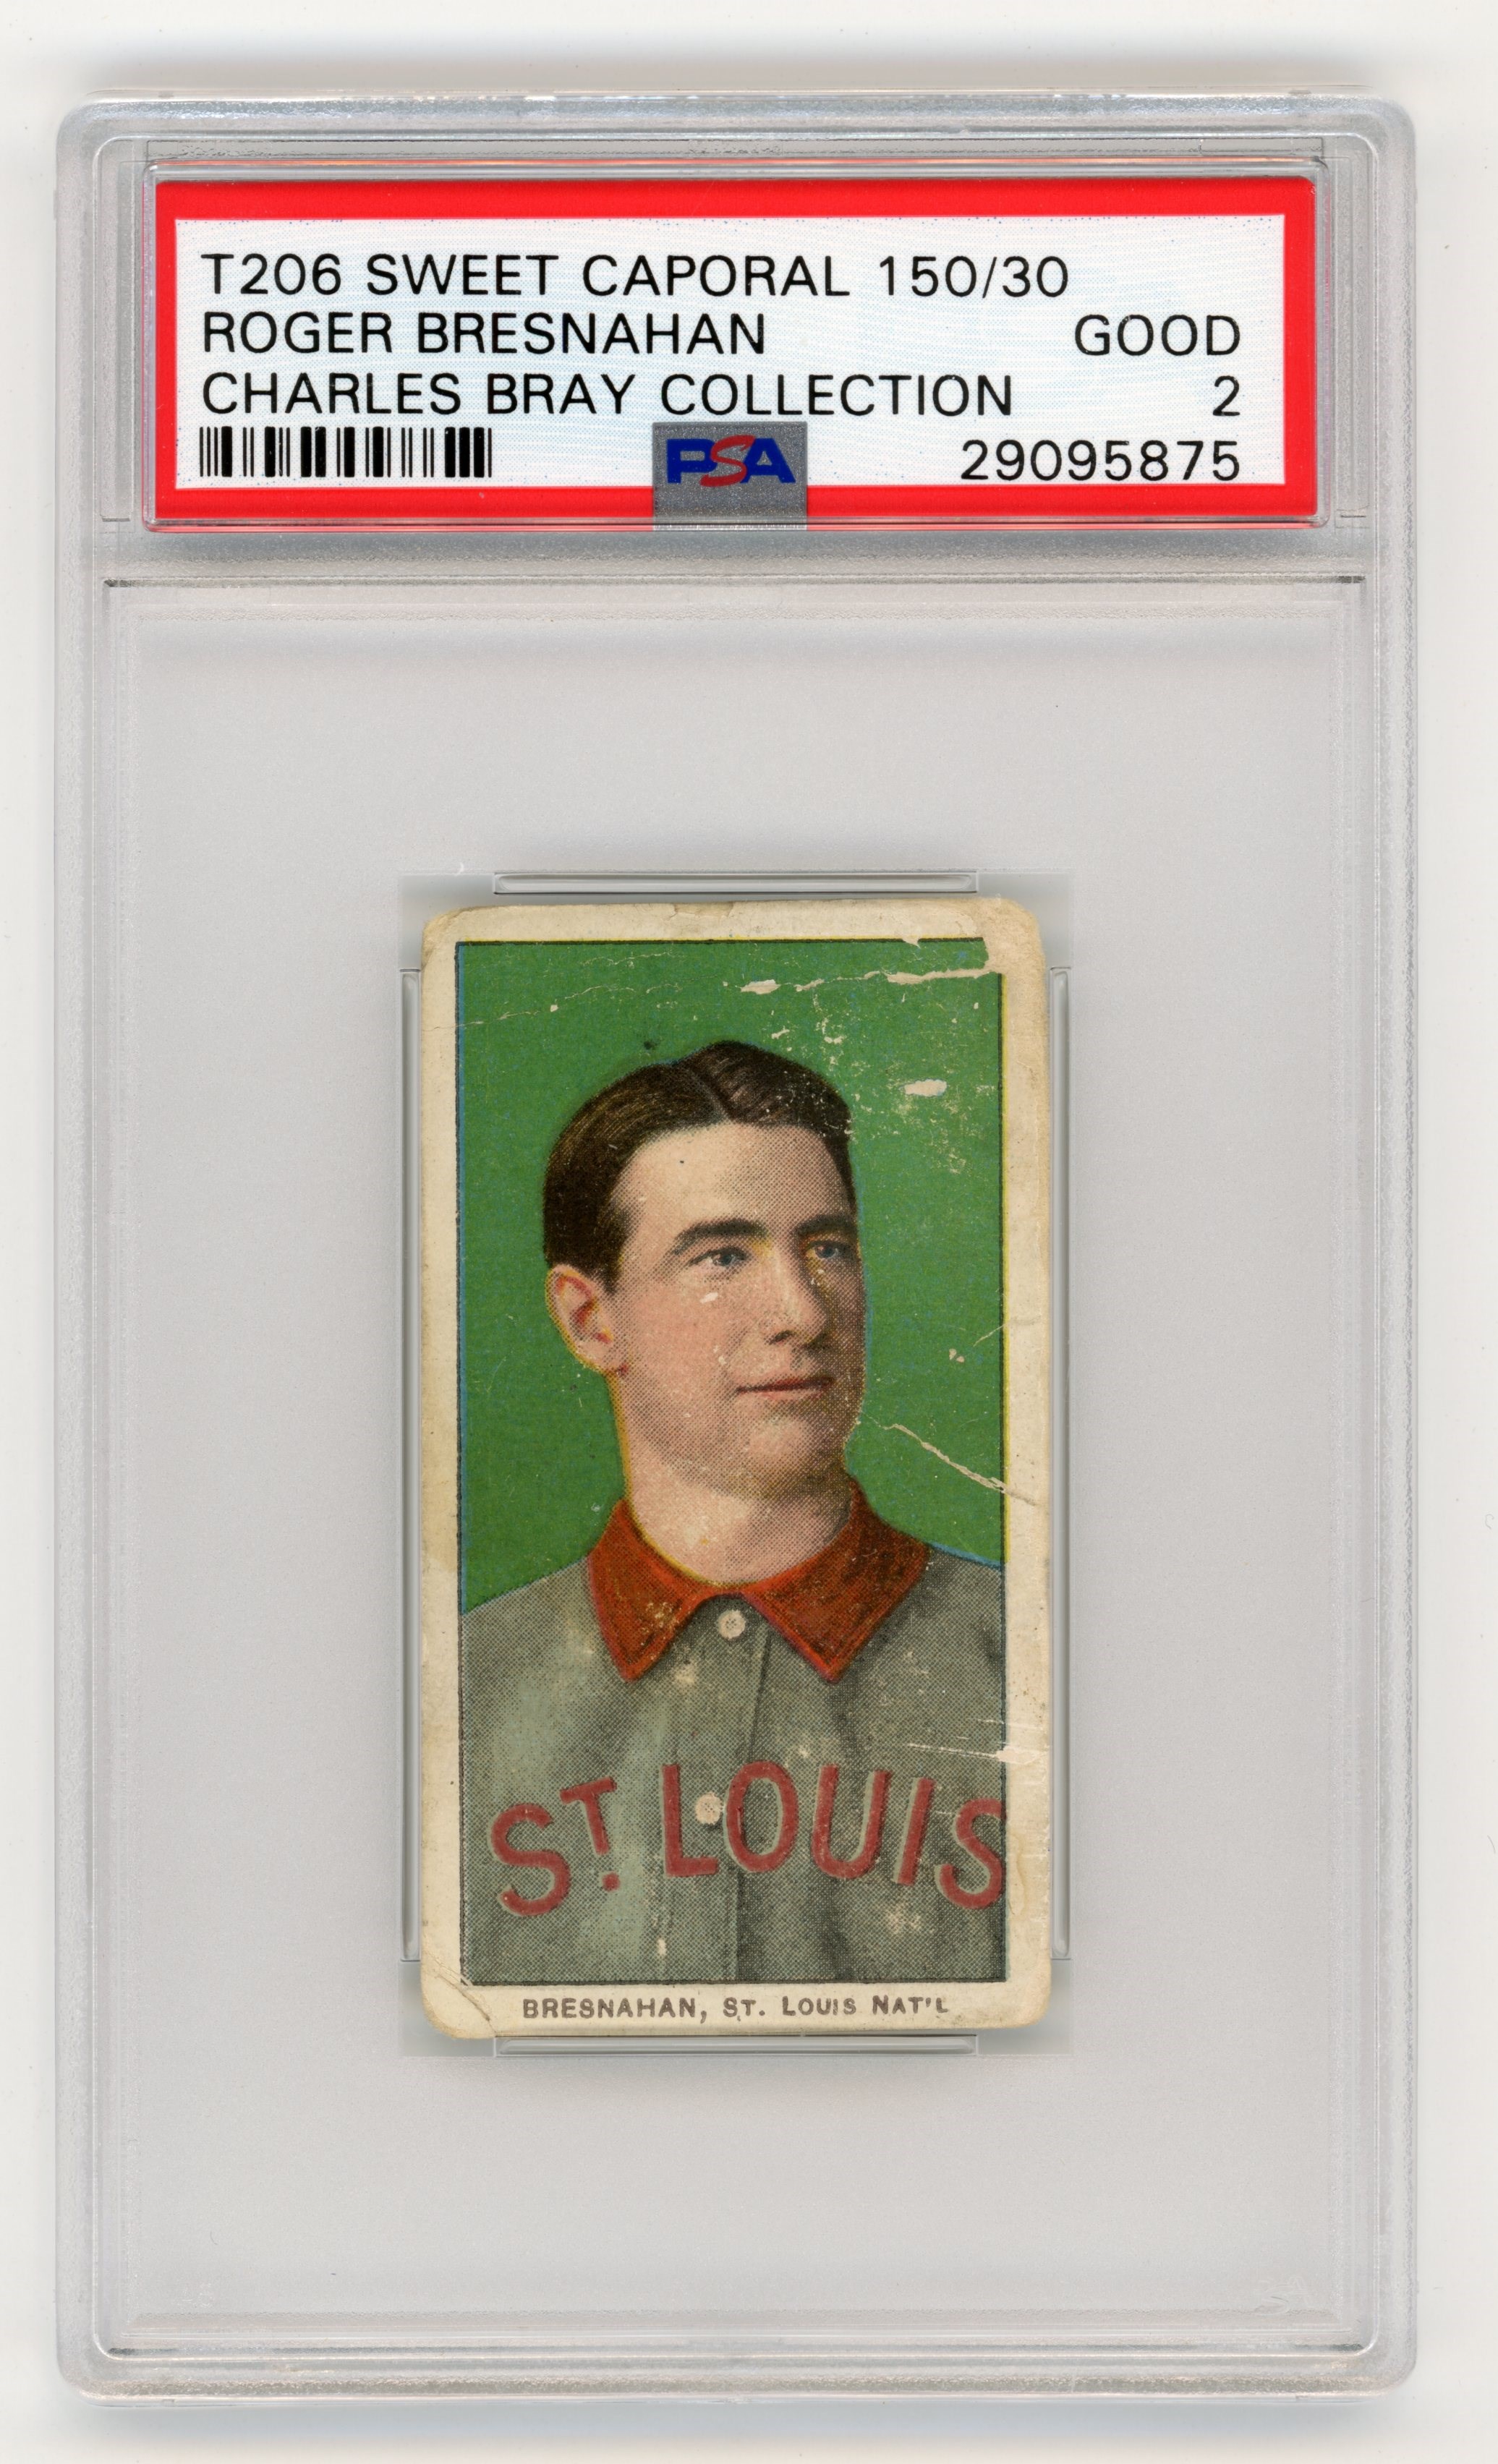 - T206 Sweet Caporal 150/30 Roger Bresnahan PSA 2 From Charles Bray Collection